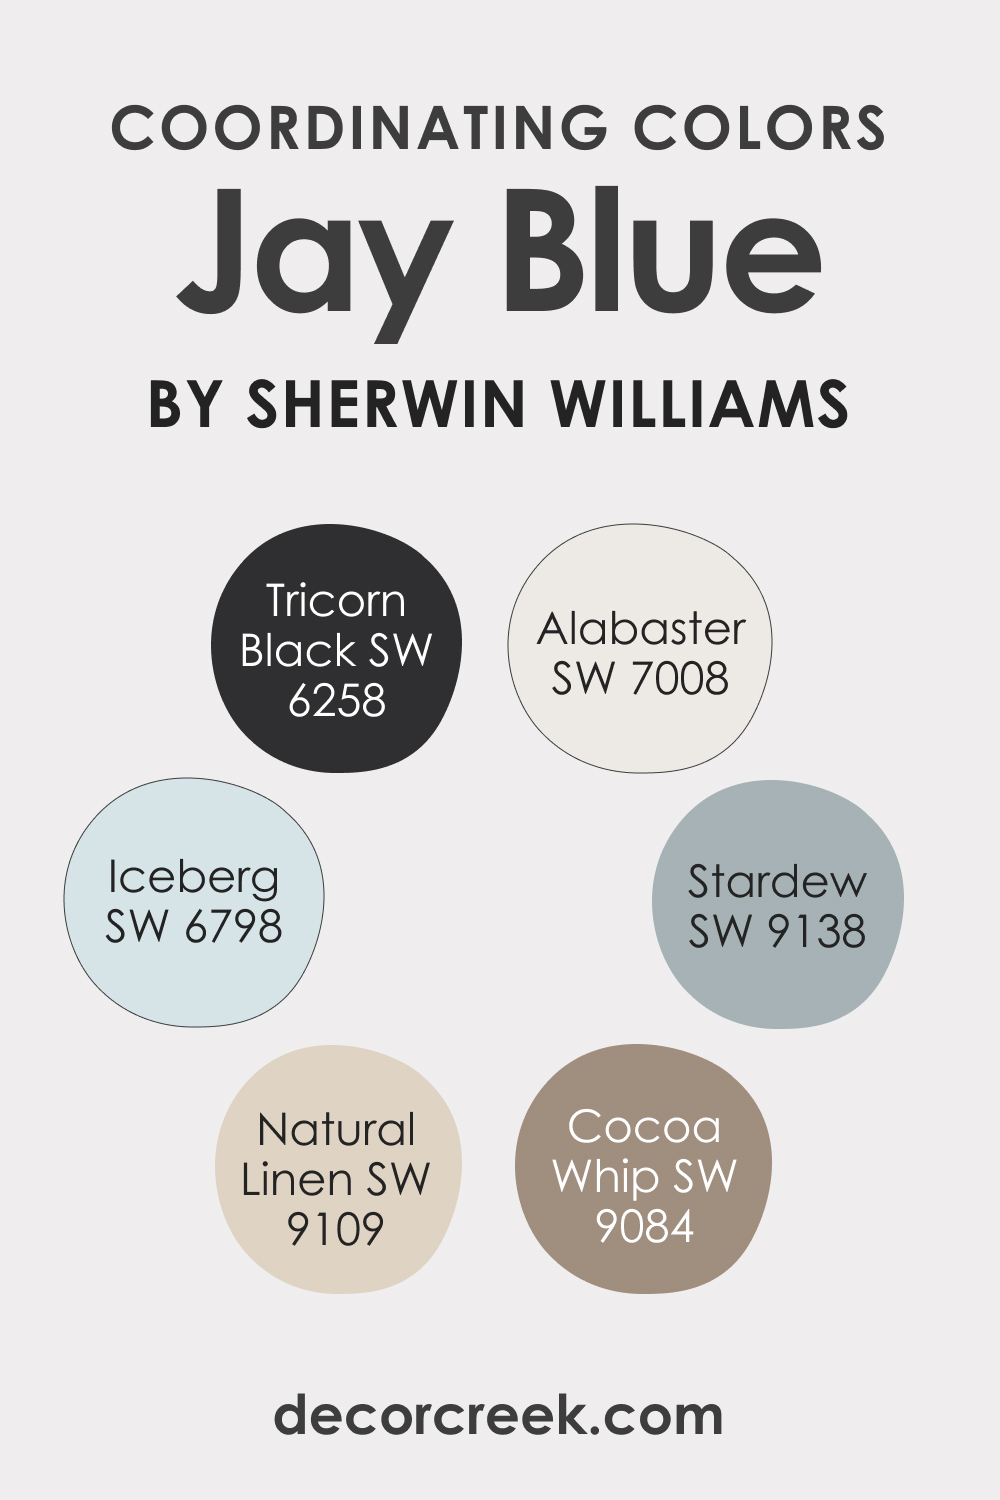 Coordinating Colors of SW 6797 Jay Blue